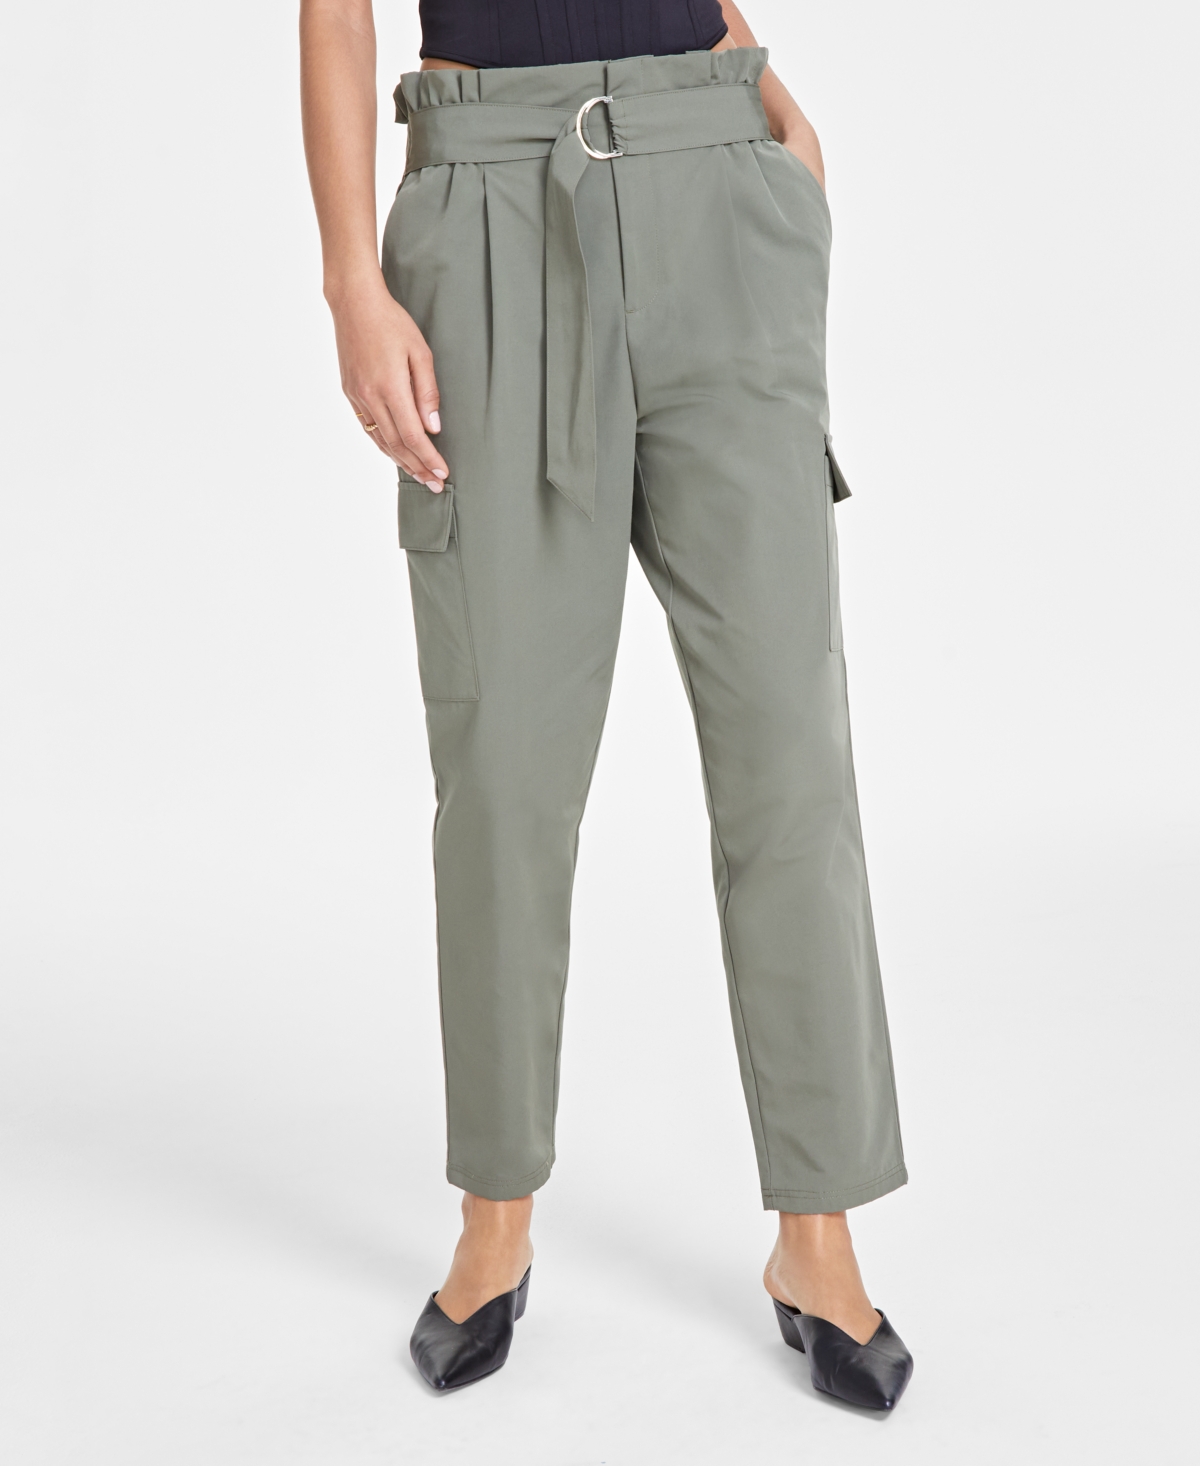 Bar Iii Women's Belted Cargo Pants, Created For Macy's In Dusty Olive